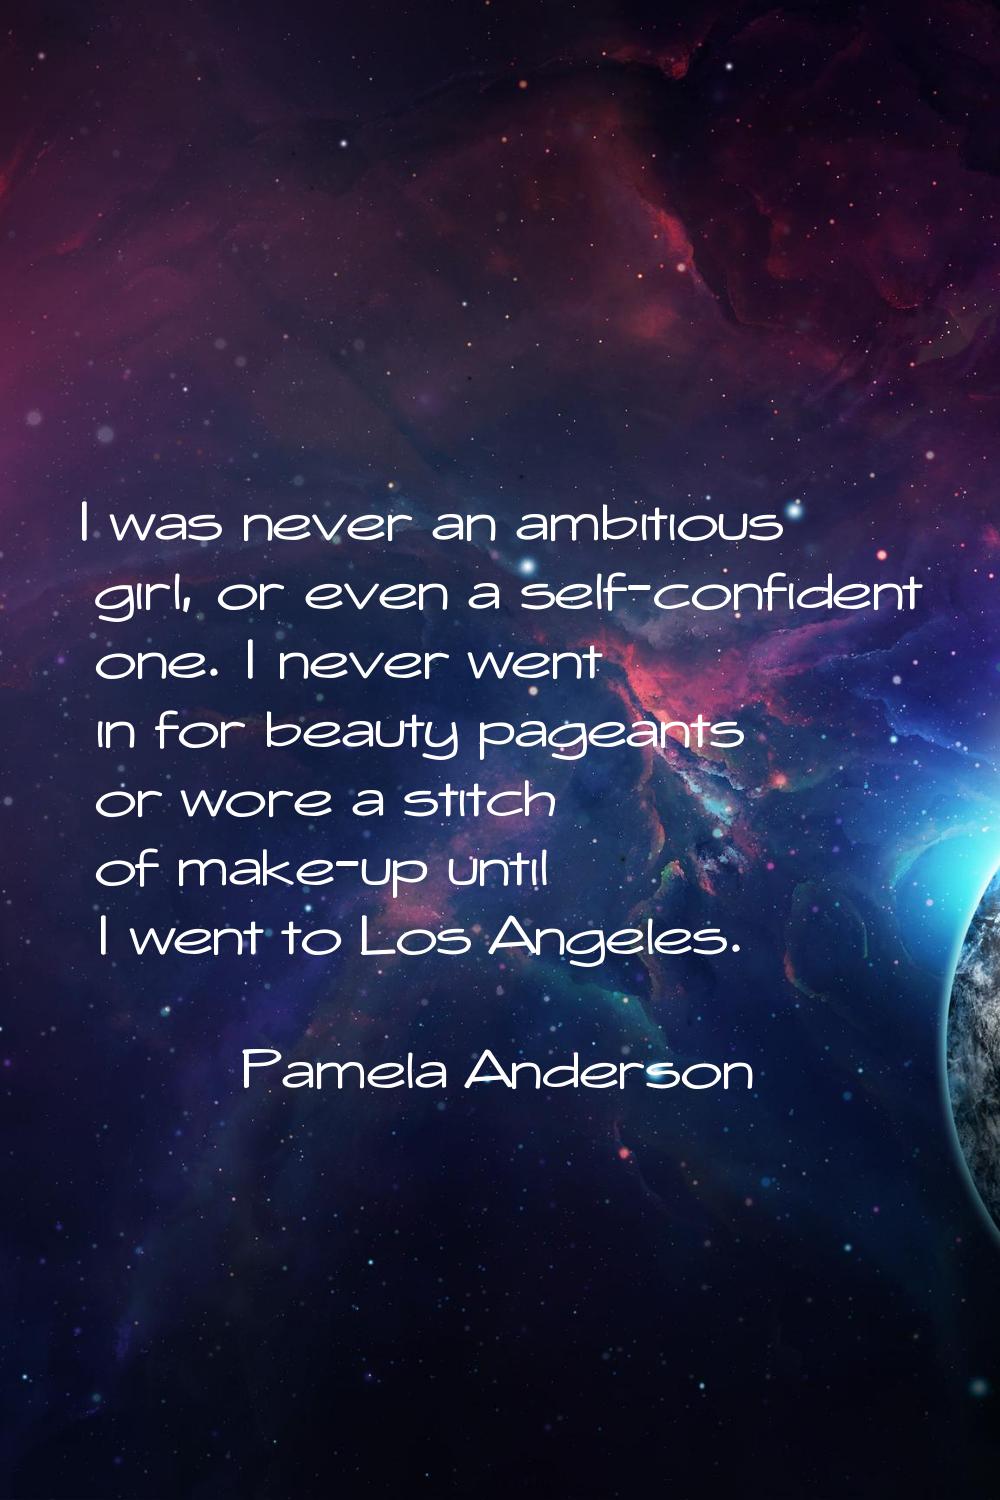 I was never an ambitious girl, or even a self-confident one. I never went in for beauty pageants or